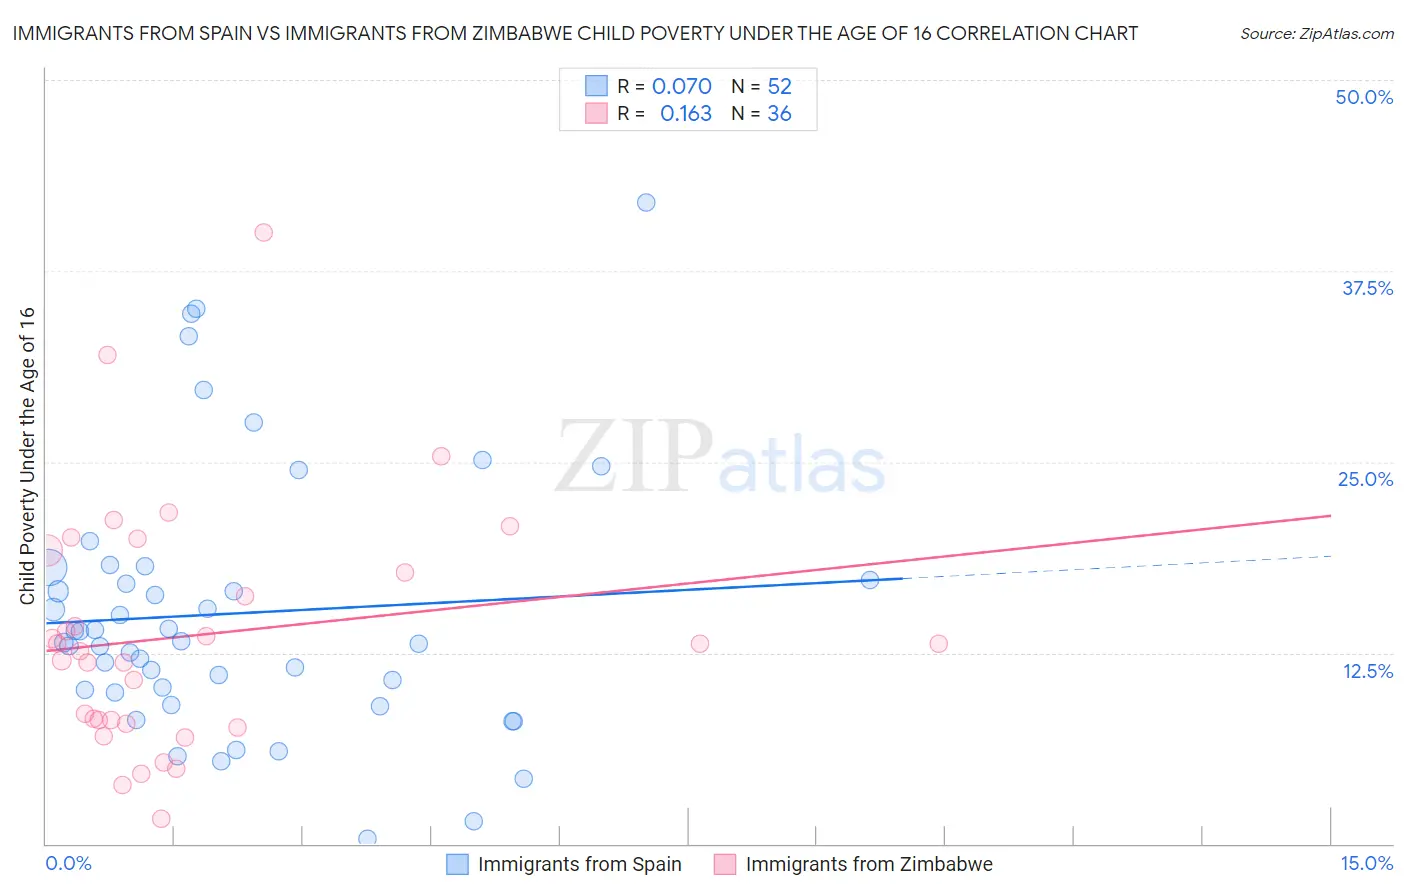 Immigrants from Spain vs Immigrants from Zimbabwe Child Poverty Under the Age of 16